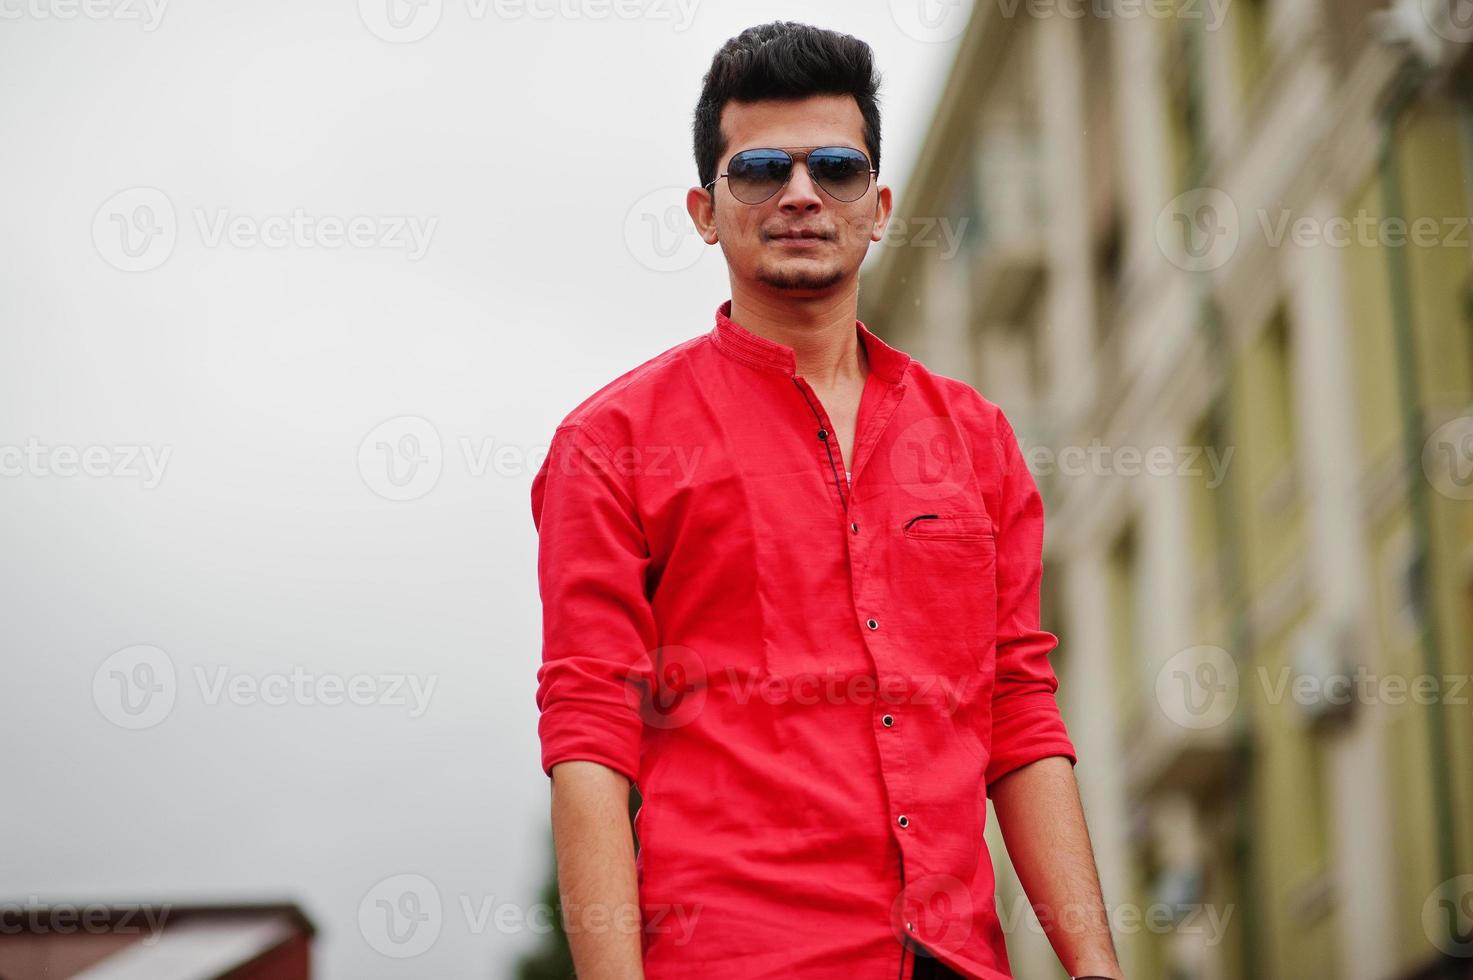 Indian man at red shirt and sunglasses posed outdoor. photo